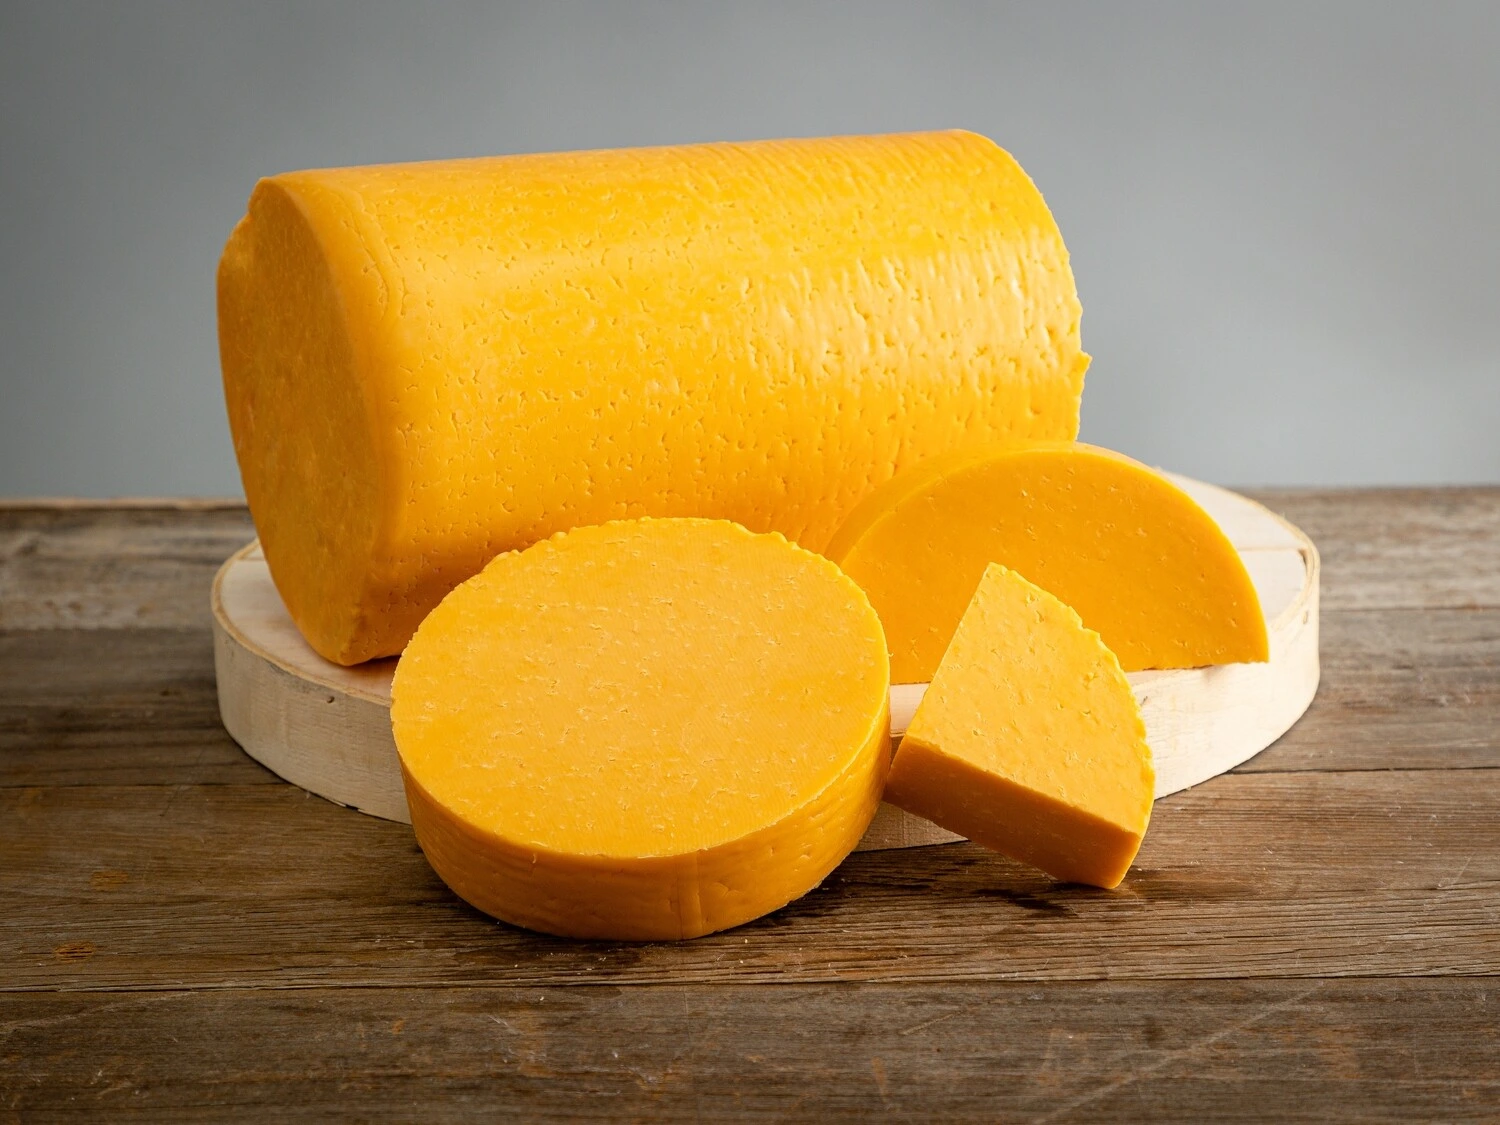 Who Sells Longhorn Cheese? The Answer Would Surprise You!